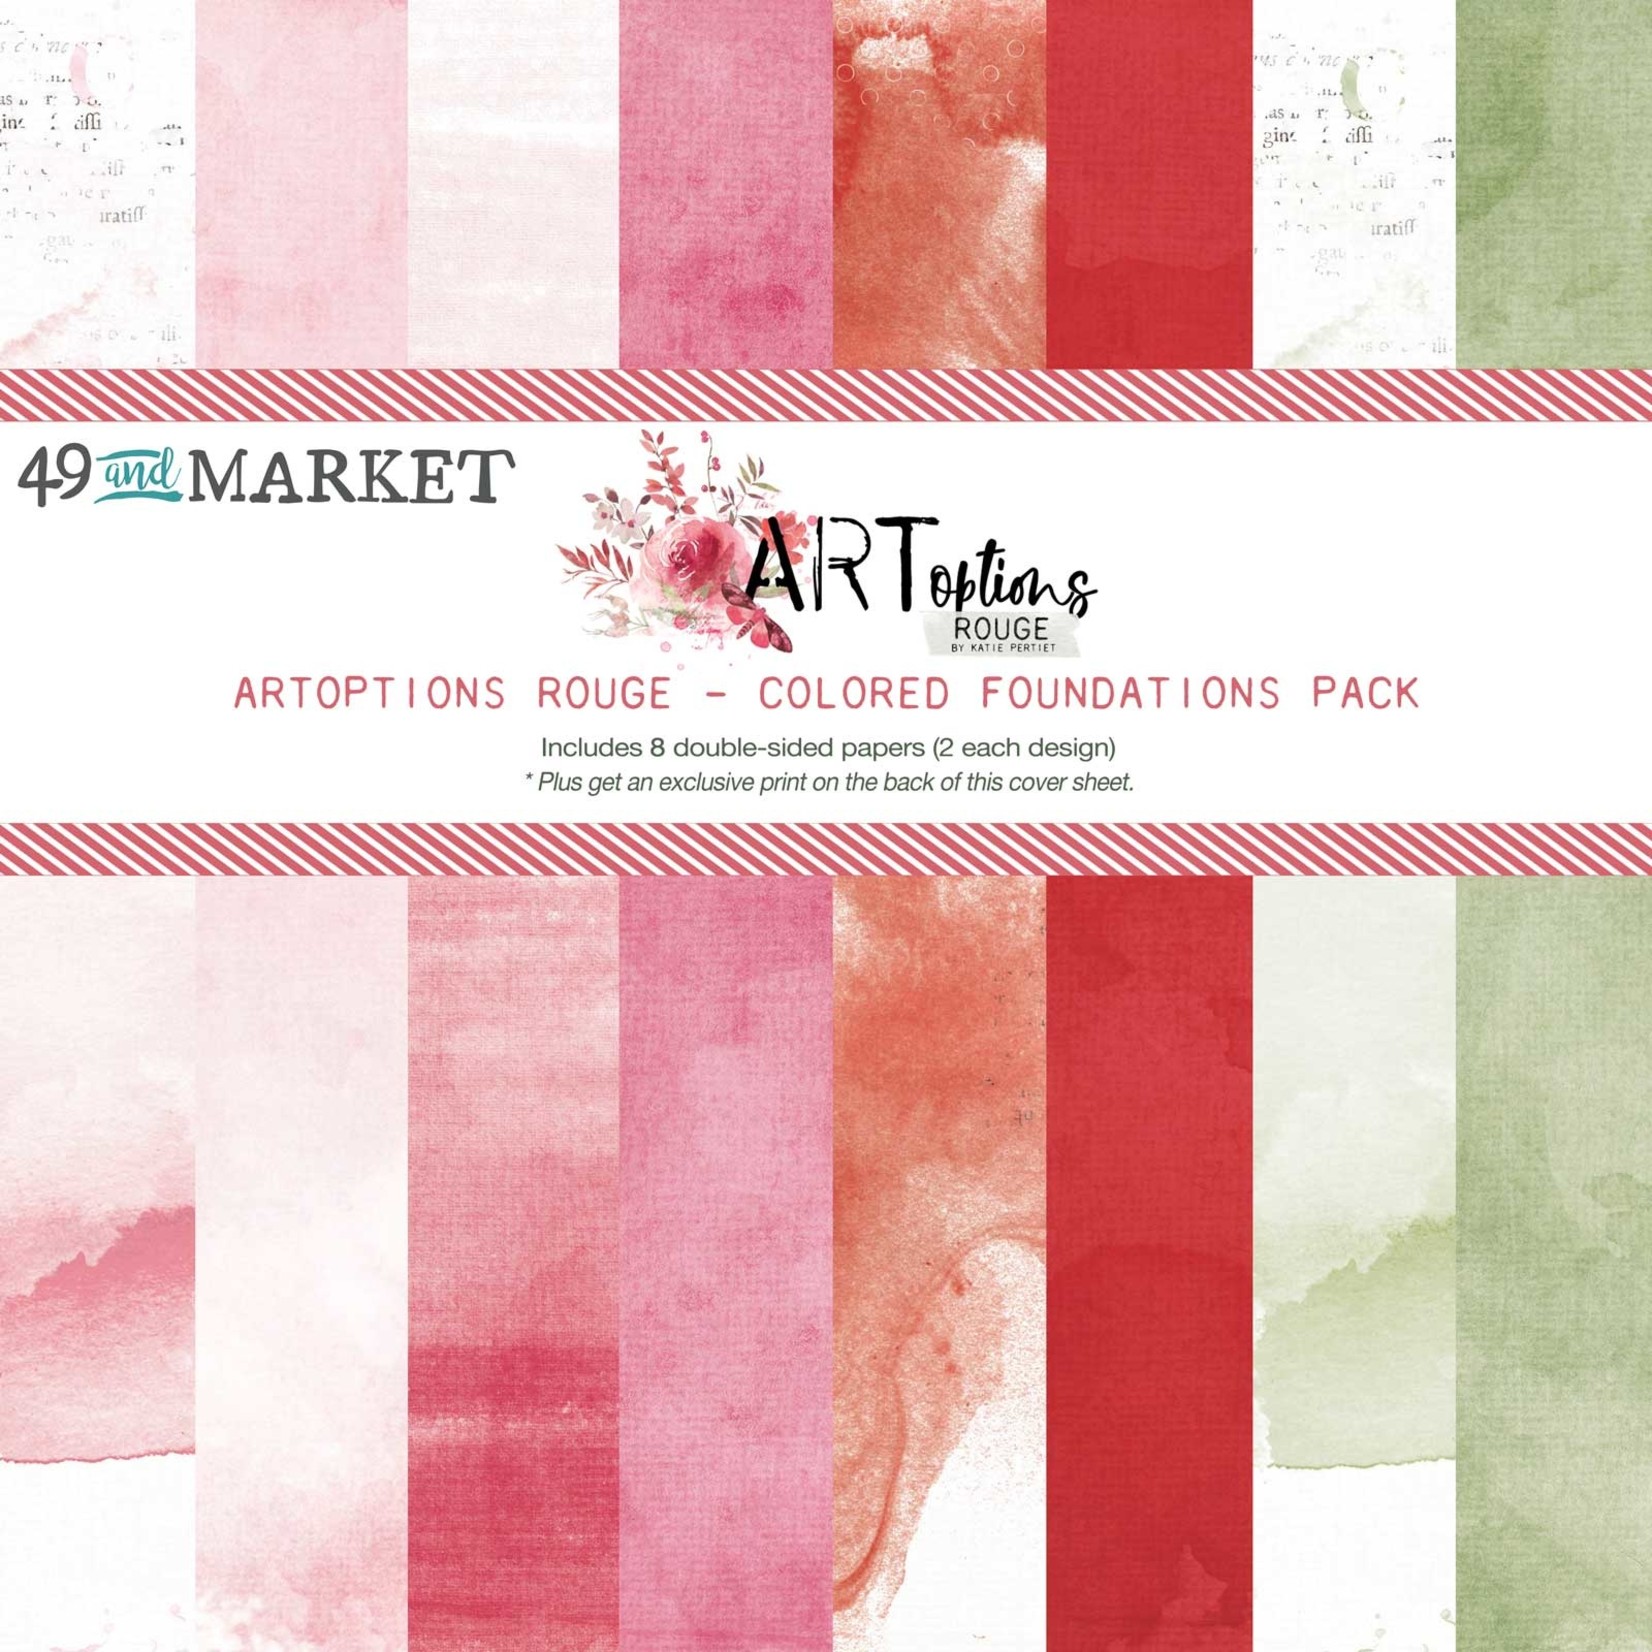 49 and Market Art Rouge:12x12 Foundation Pack